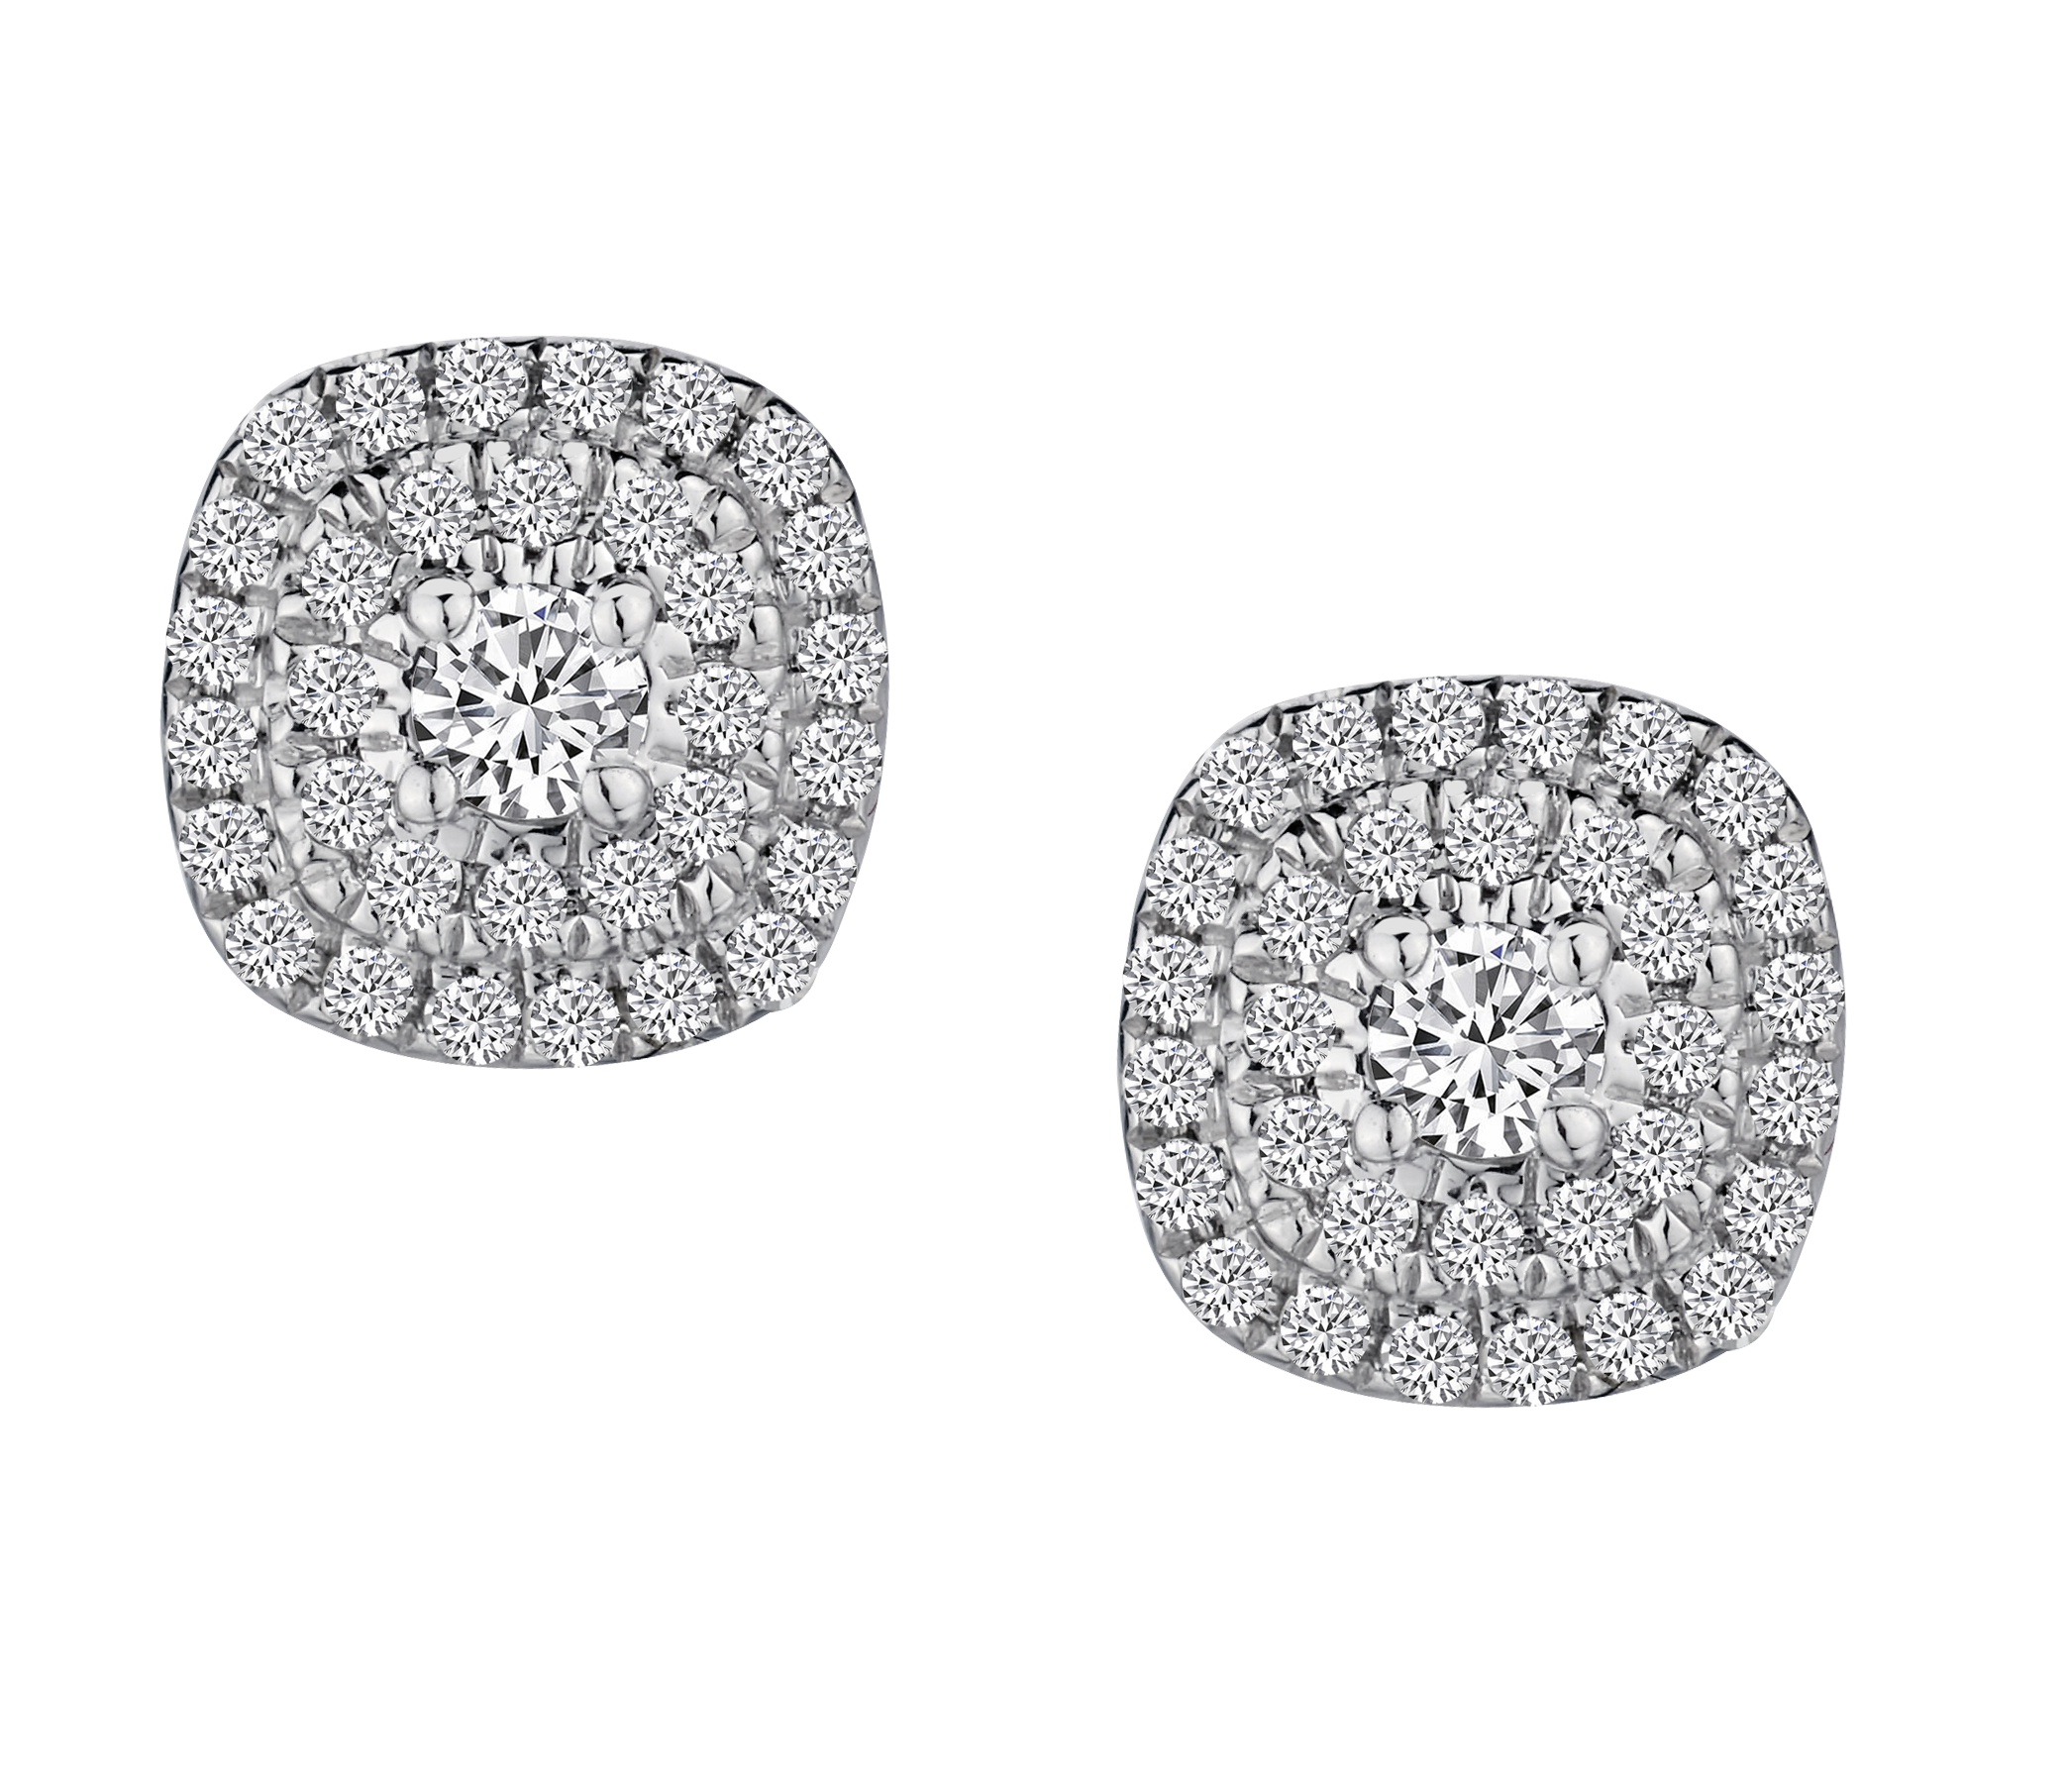 .25 Carat of Diamonds Double Halo Stud Earrings, 10kt White Gold.....................NOW